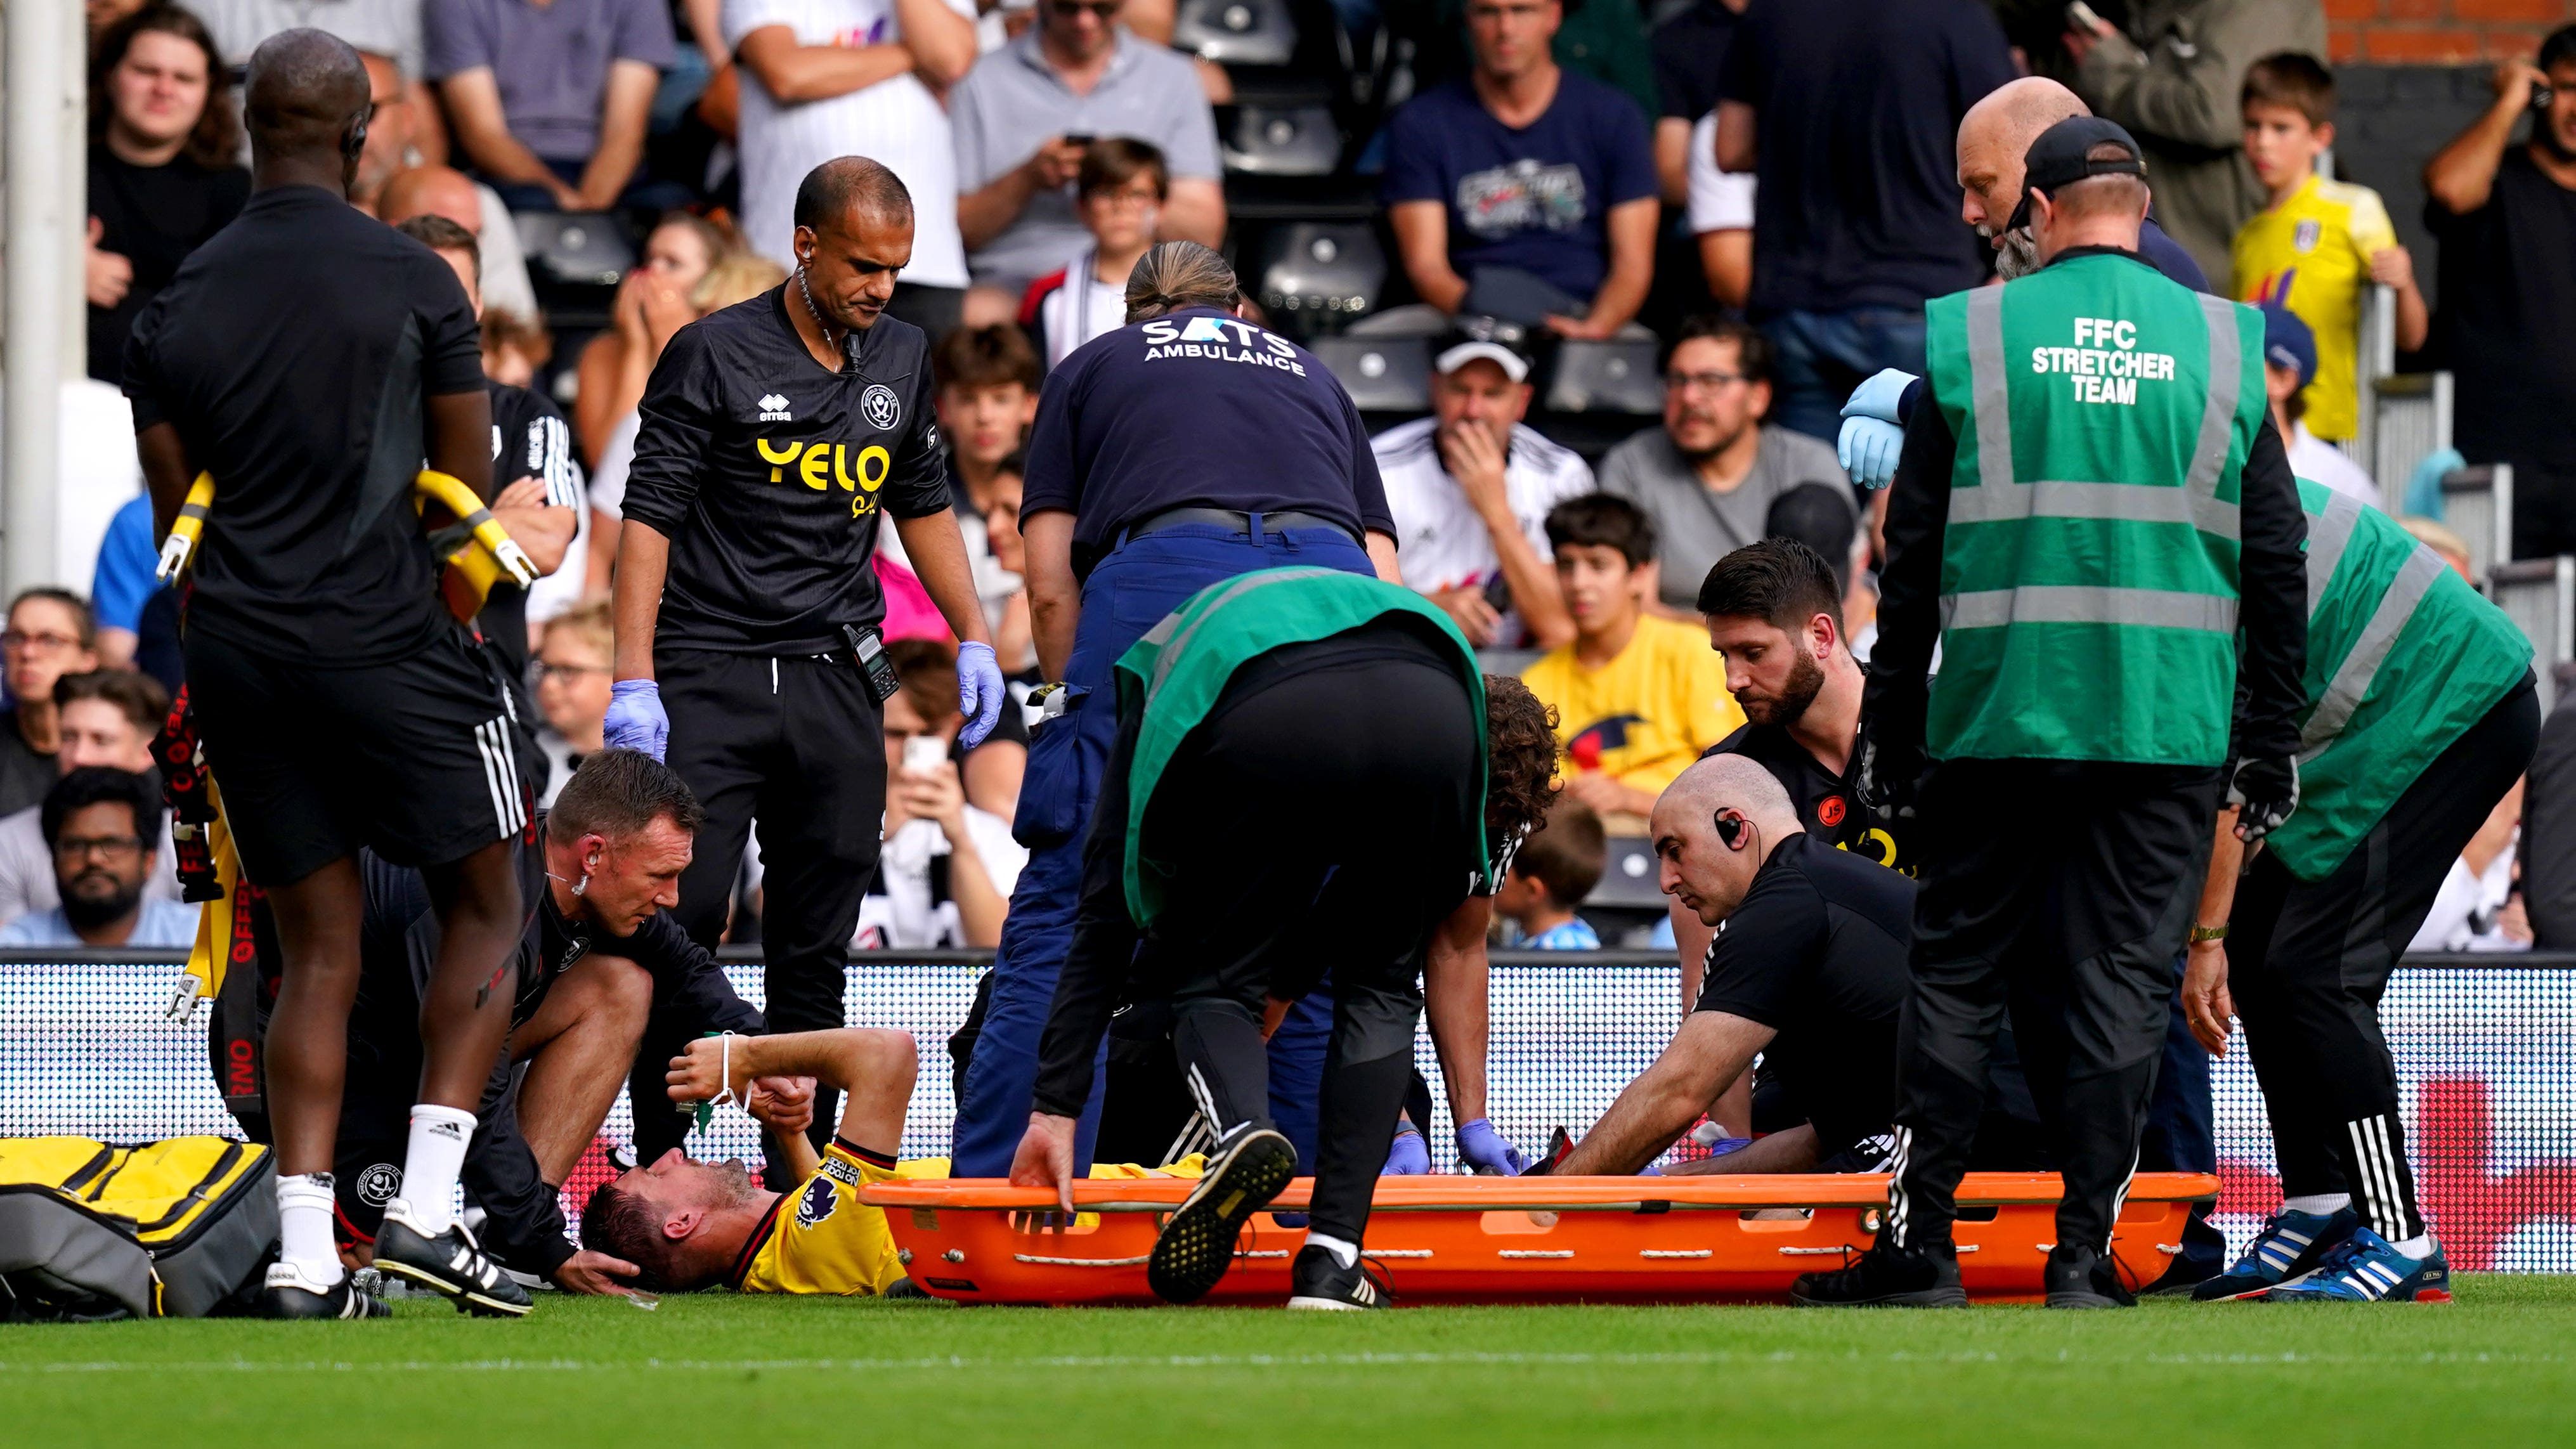 Chris Basham ‘overwhelmed by support’ after breaking ankle against Fulham